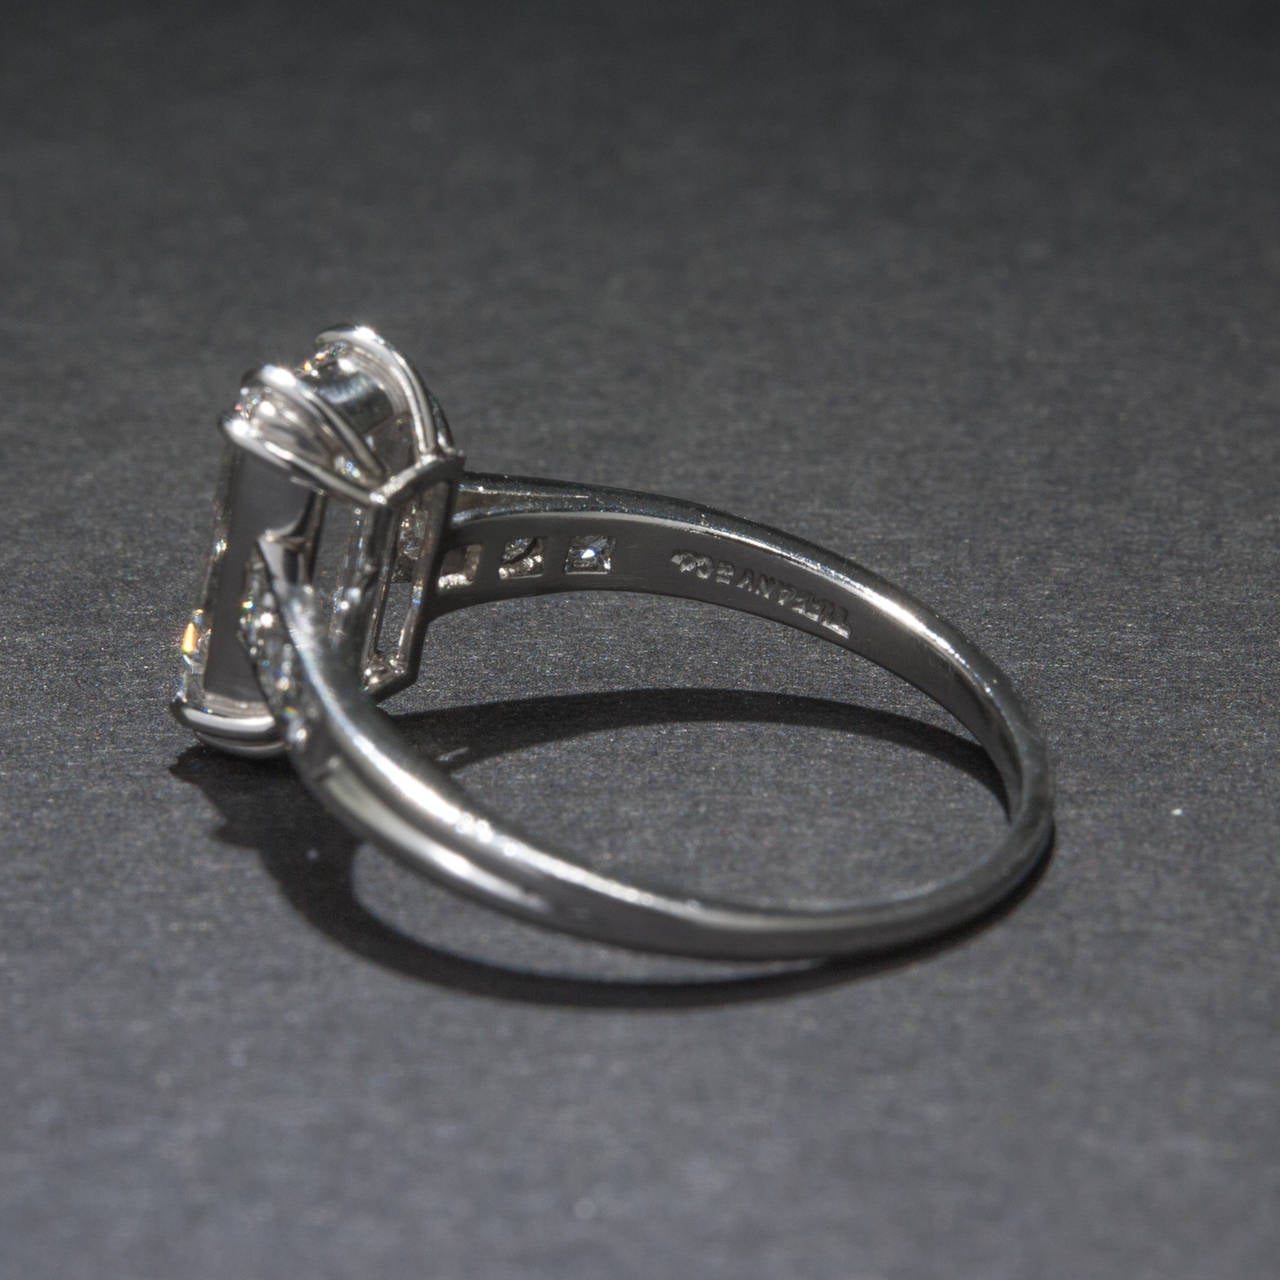 Tiffany & Co. 1.63 Carat GIA Cert Diamond and Platinum Ring In Excellent Condition For Sale In Carmel, CA